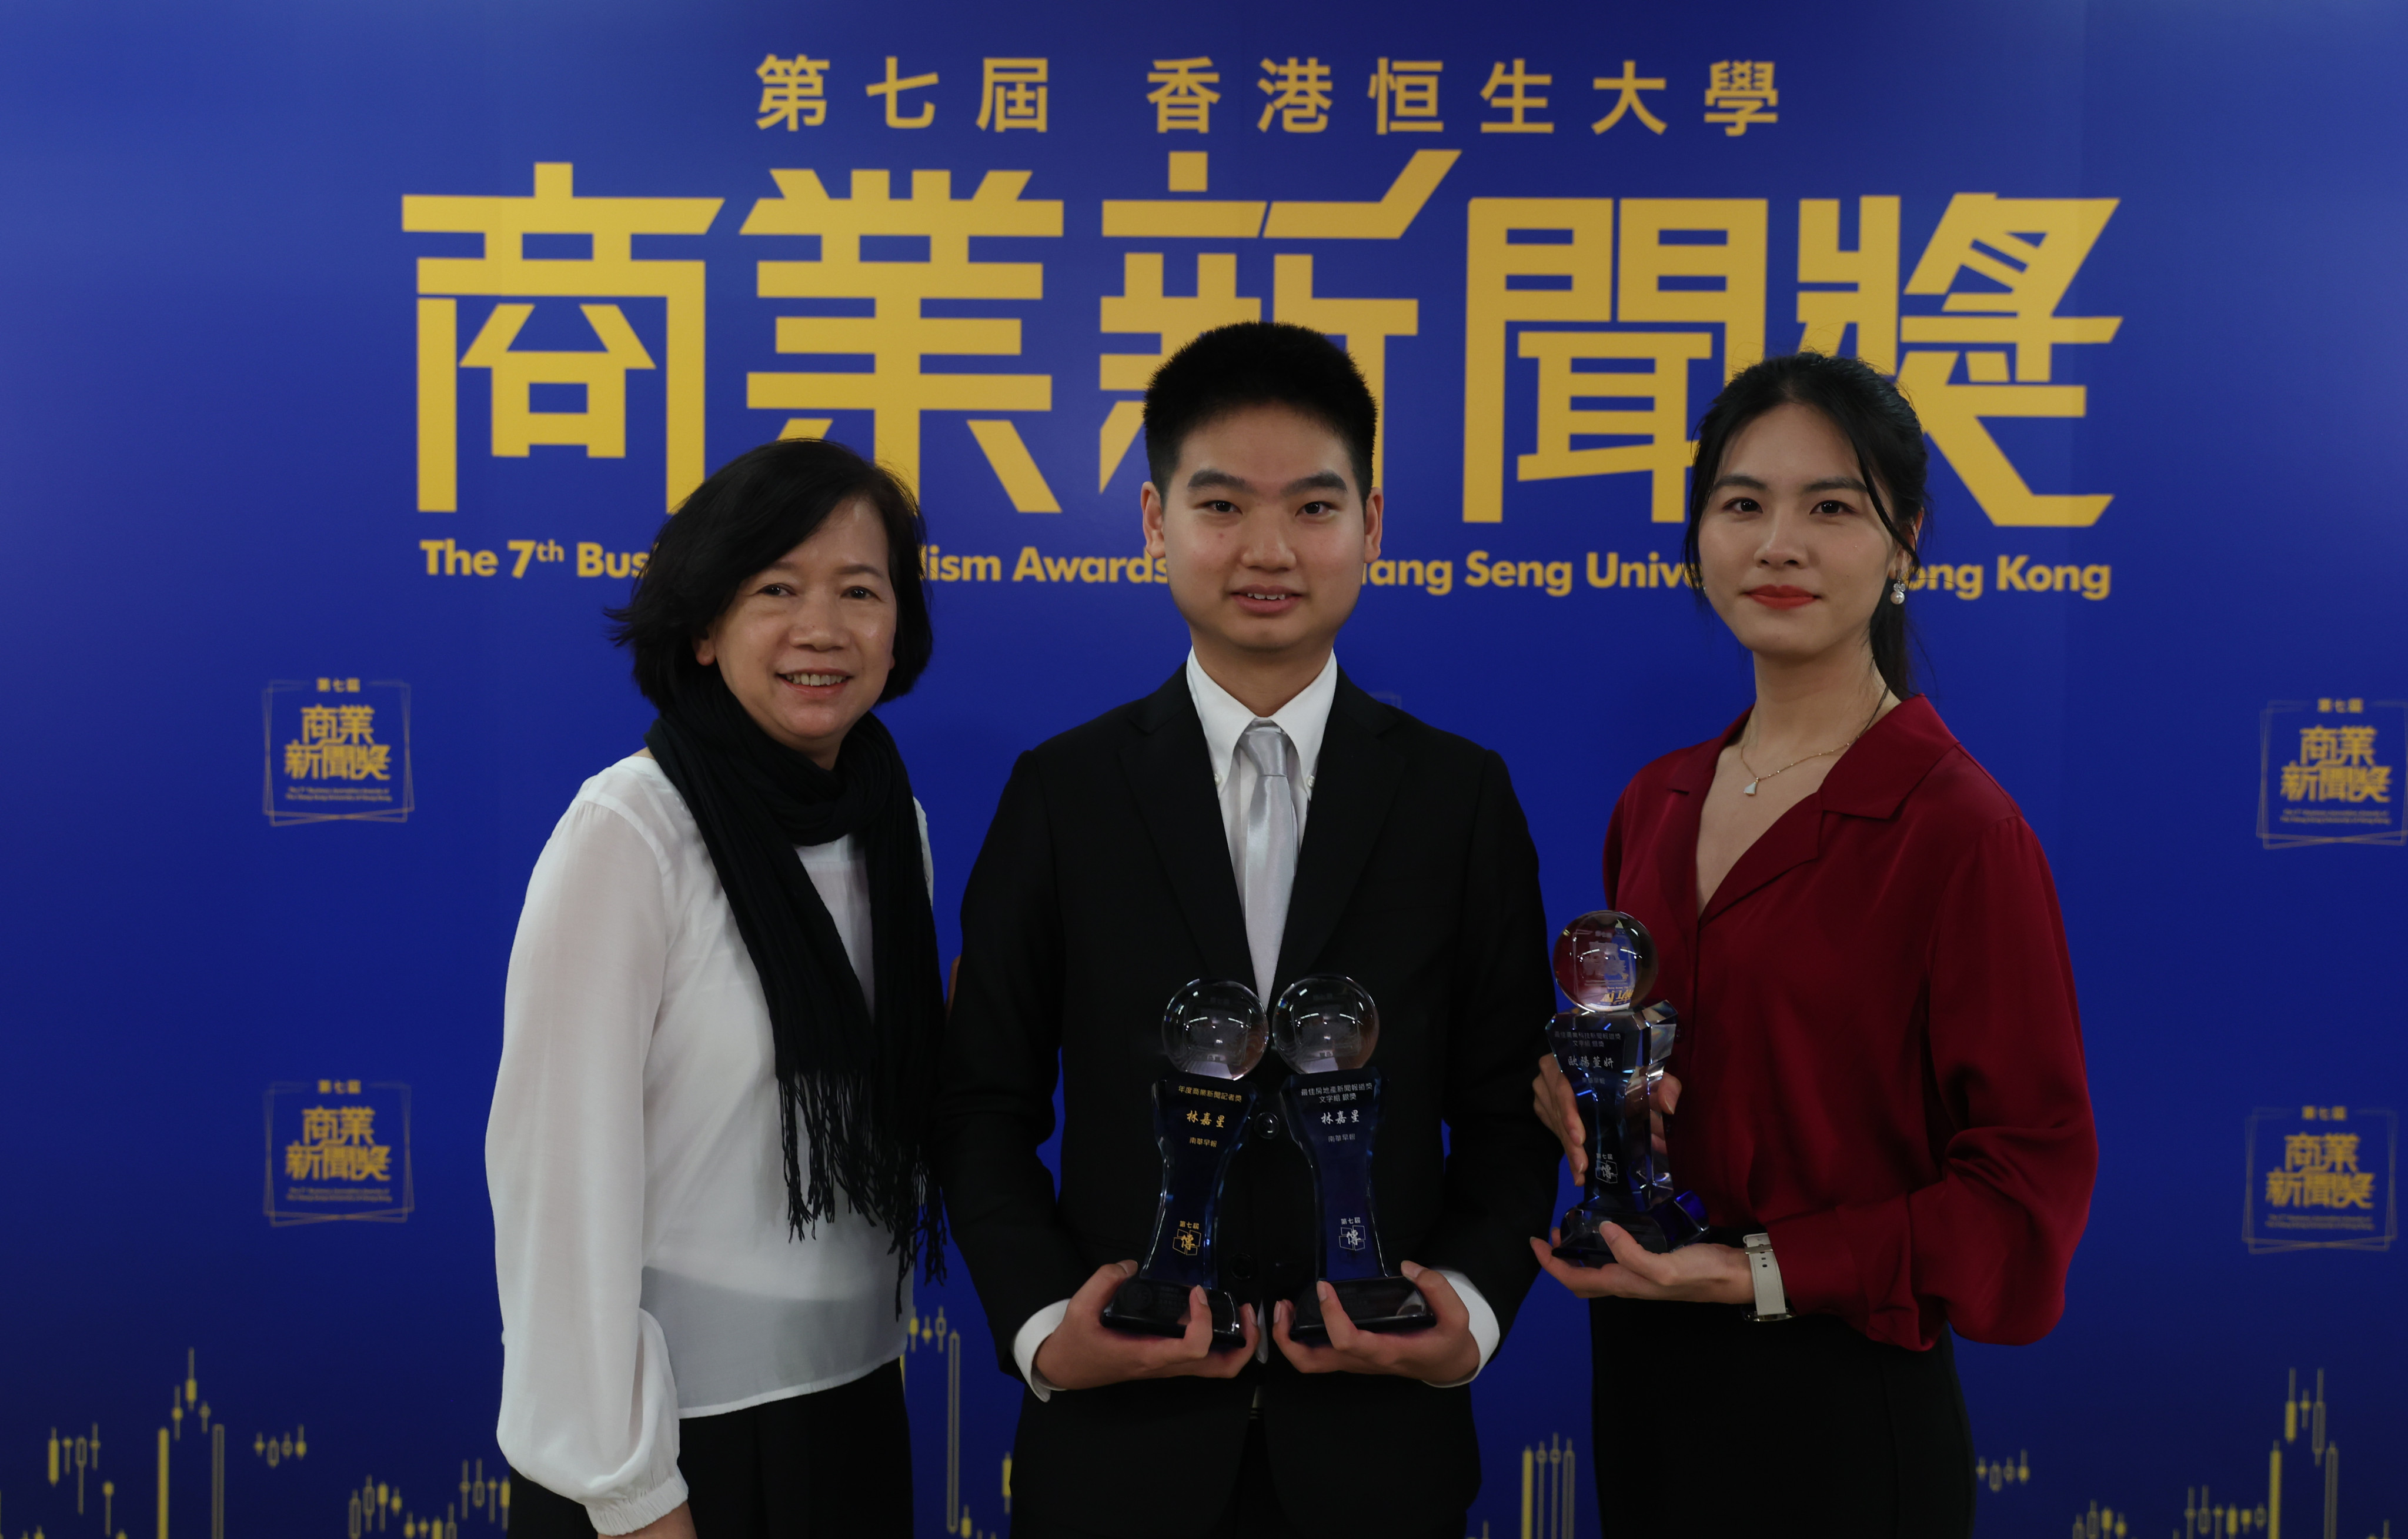 The Post’s Deputy Business Editor Peggy Sito, Senior Reporter Lam Ka-sing and Reporter Iris Ouyang at the 7th Business Journalism Awards presented by the Hang Seng University’s School of Communications on April 27, 2023. Photo: Yik Yeung-man.